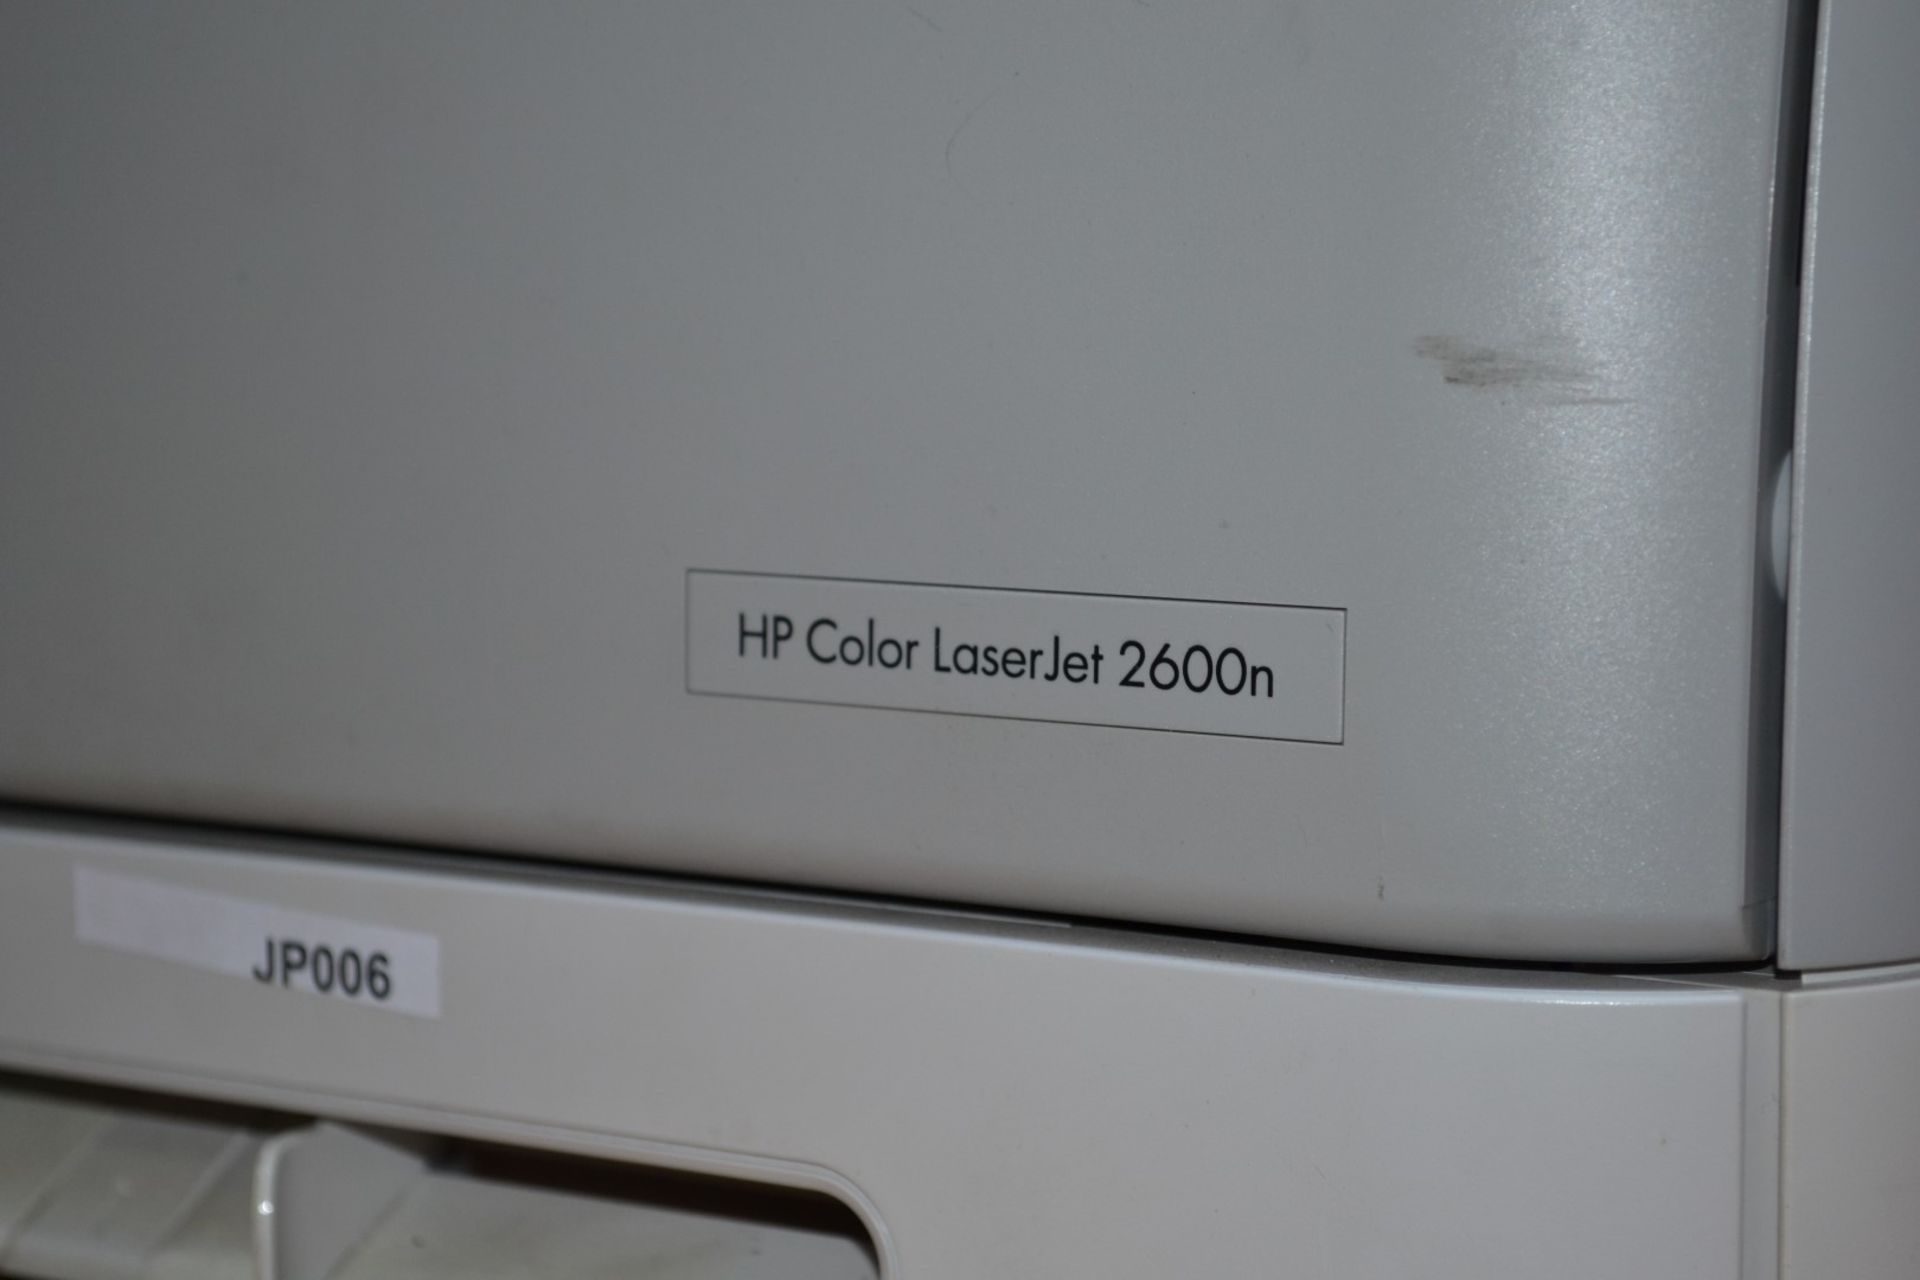 1 x HP Colour Laserjet Printer - Model 2600n - Removed From Office Environment - CL011 - Ref JP006 - - Image 4 of 4